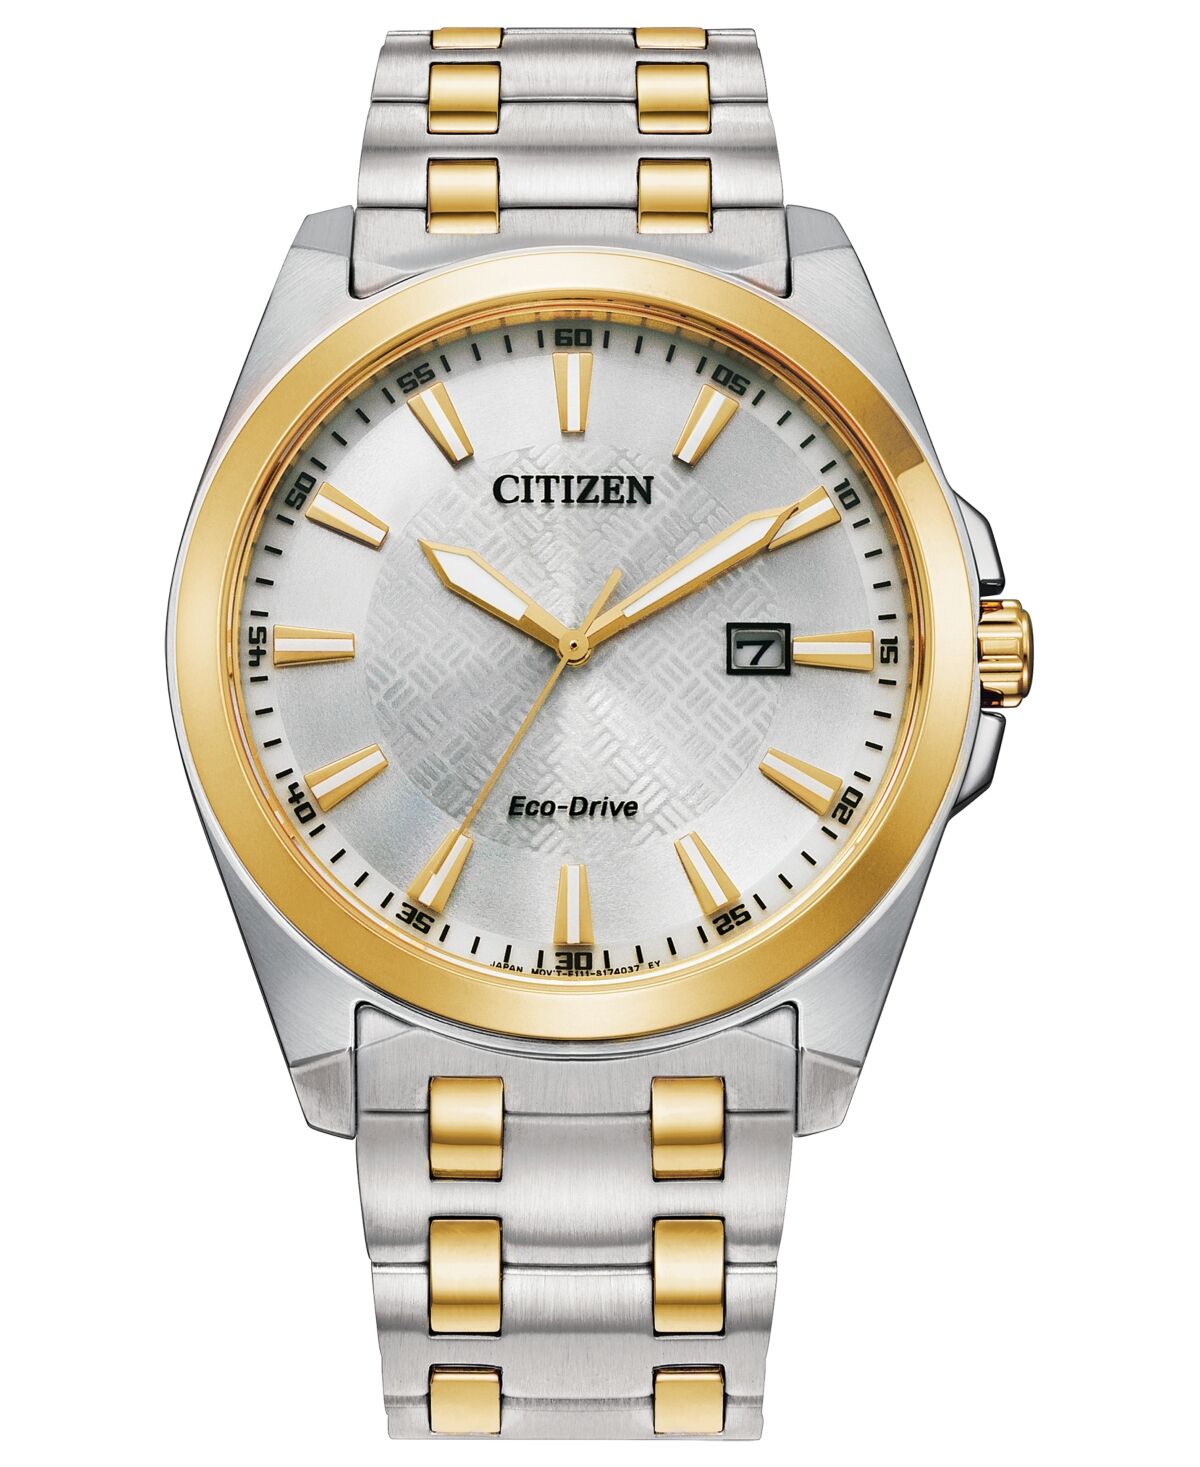 Citizen Eco-Drive Men's Corso Two-Tone Stainless Steel Bracelet Watch 41mm - Two-tone